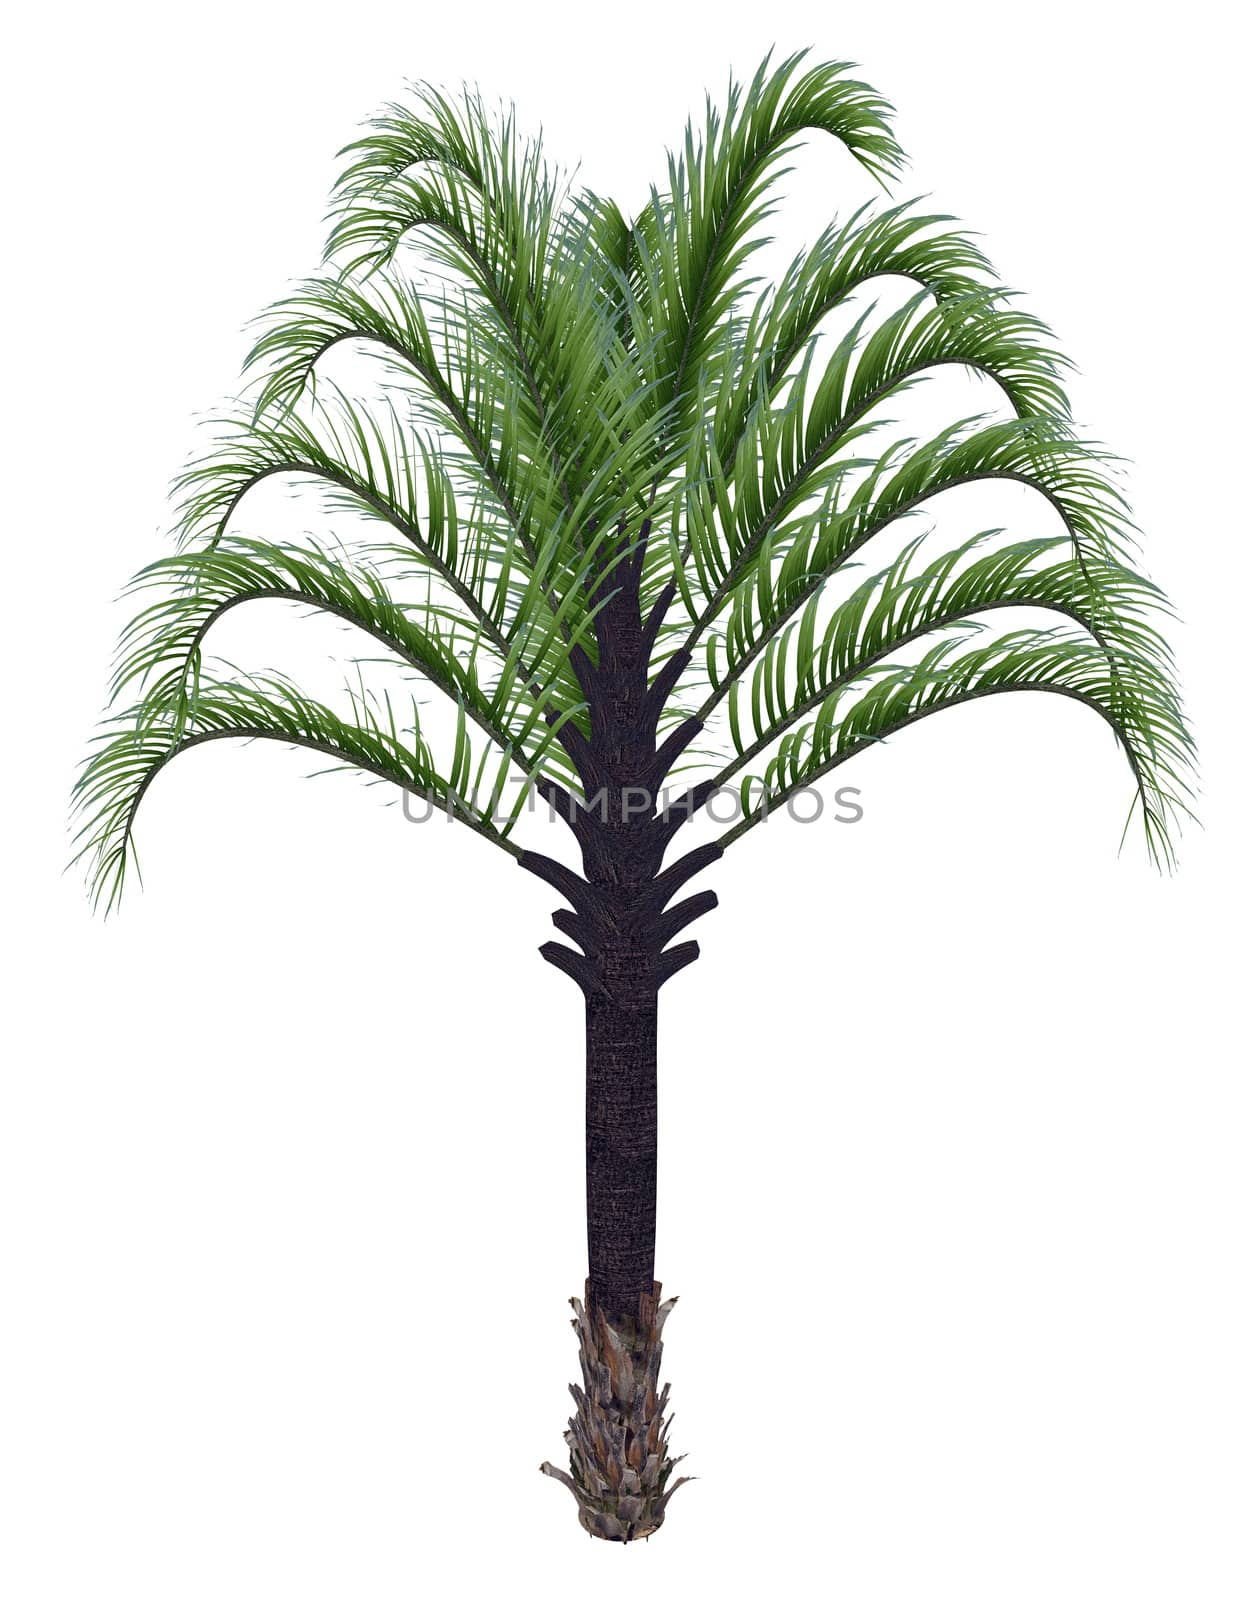 Triangle palm tree, dypsis decaryi isolated in white background - 3D render